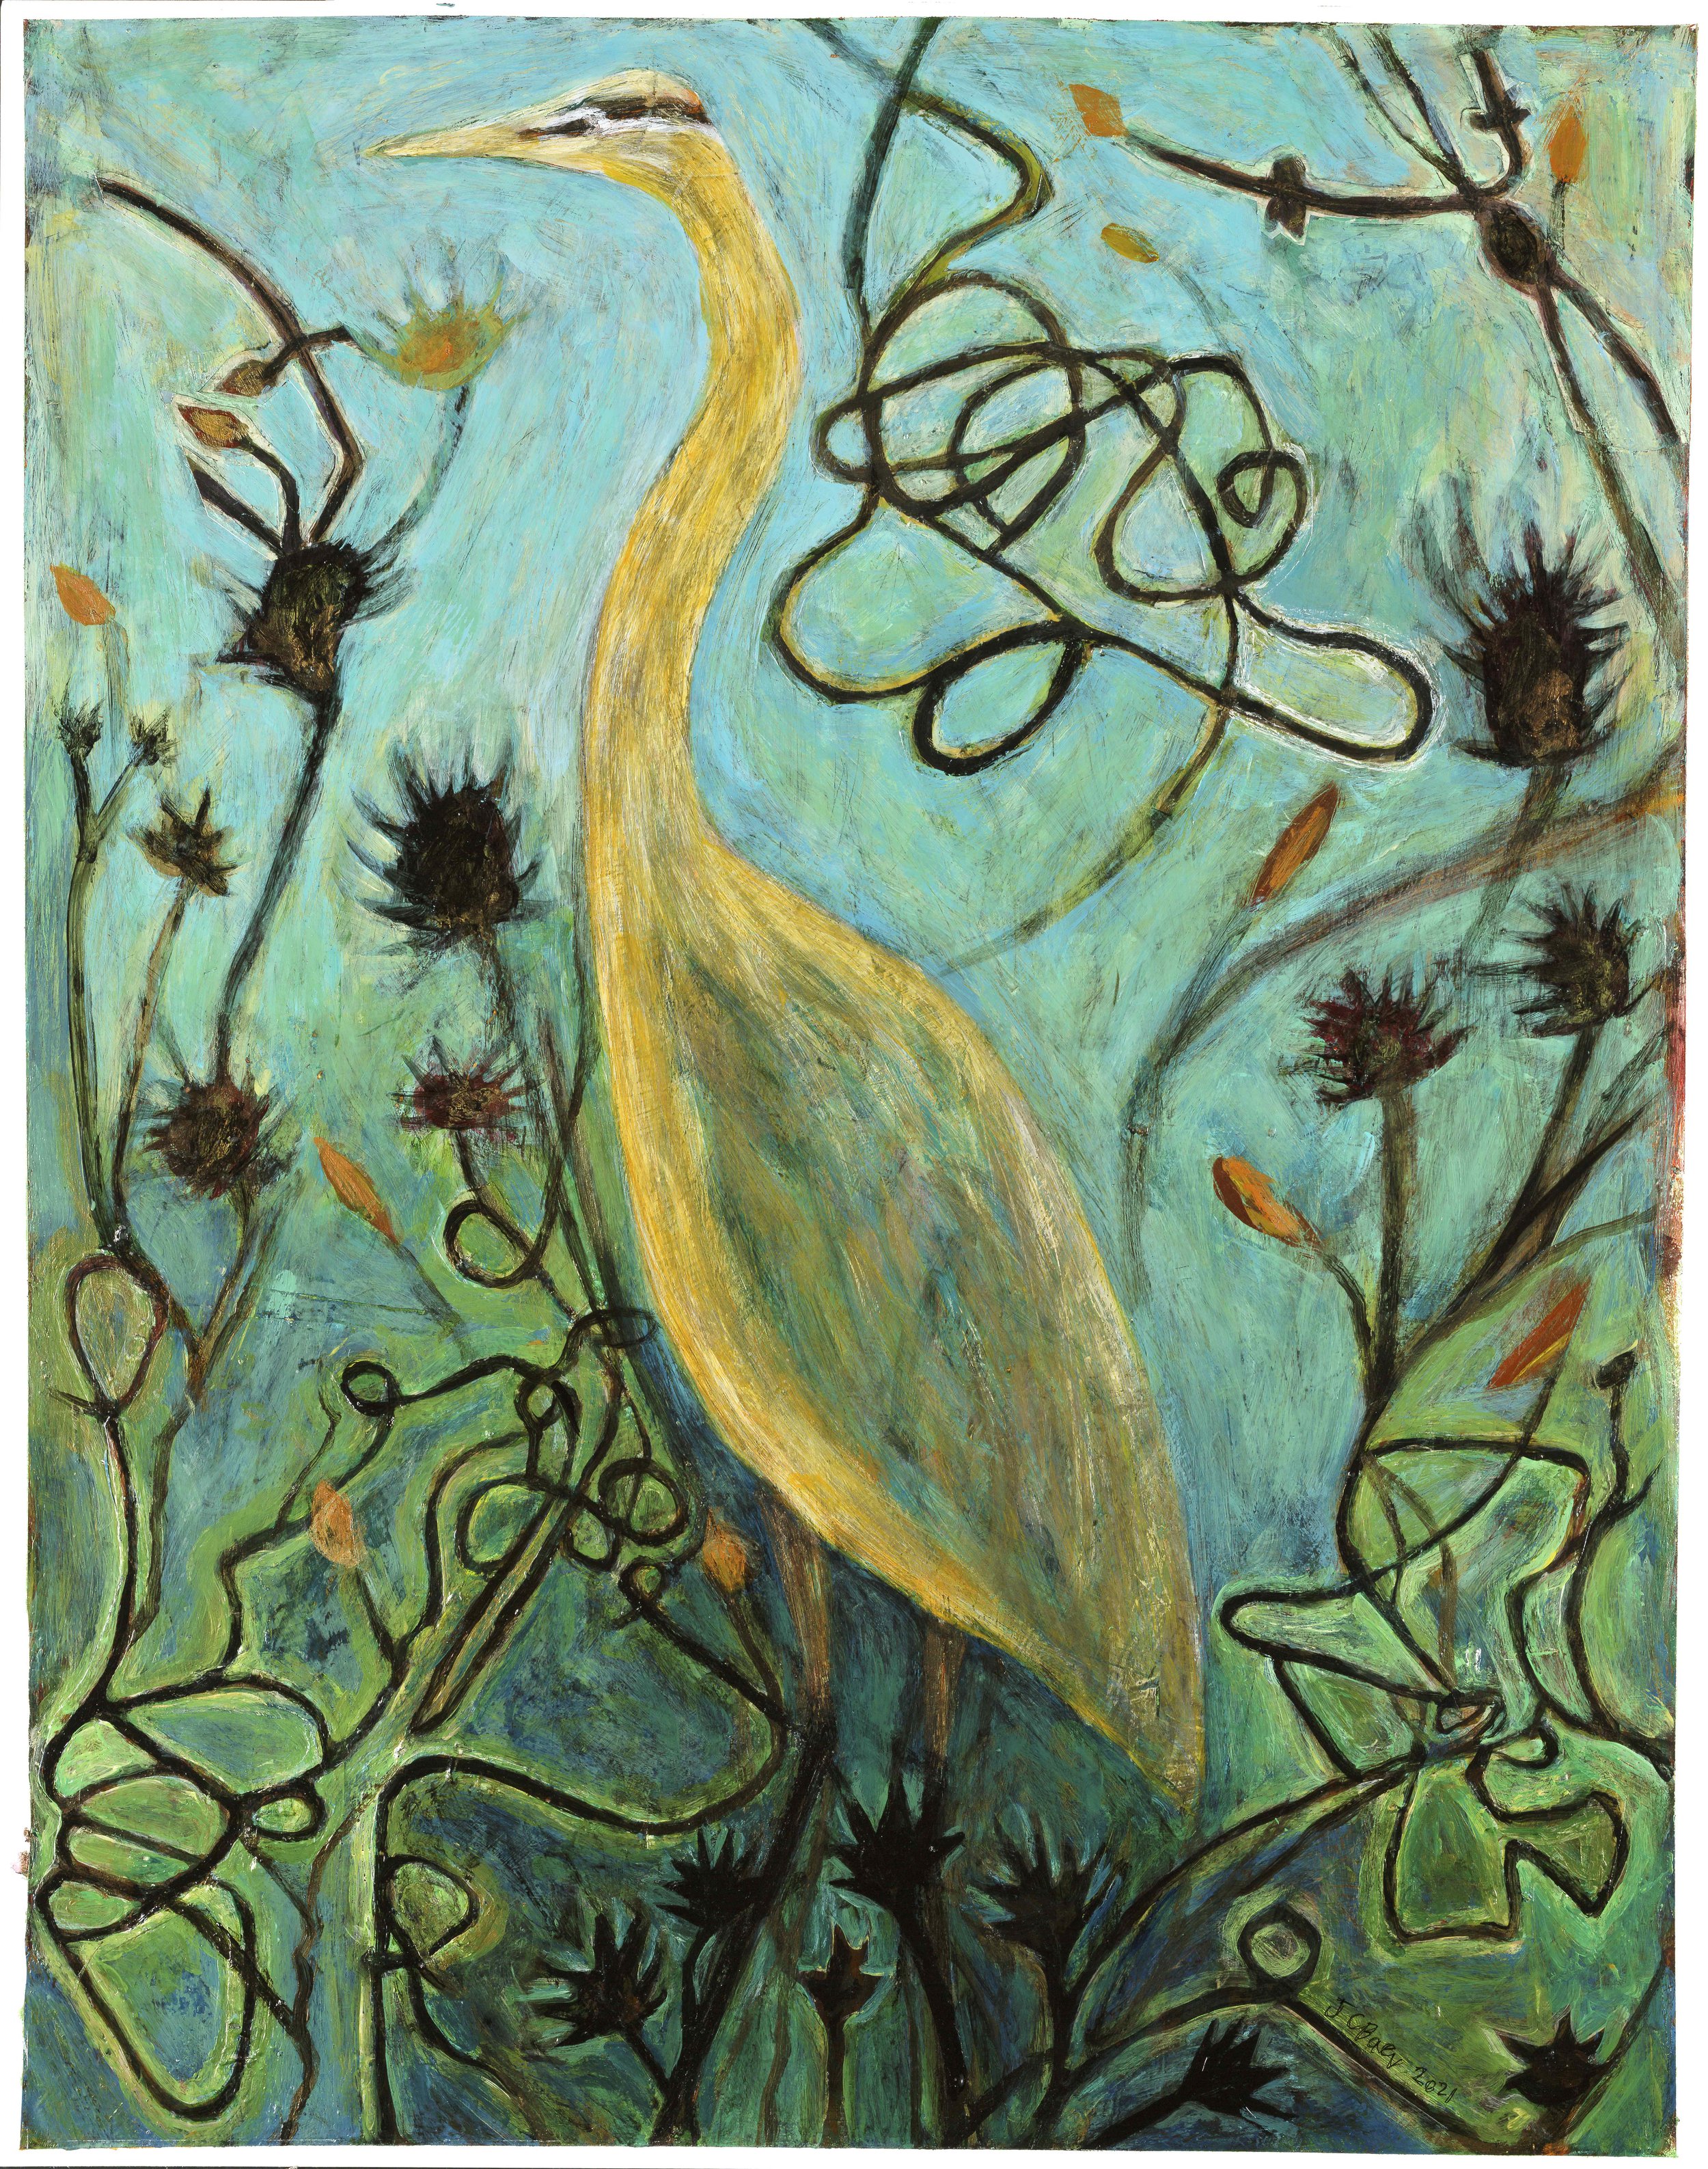 Heron, 2021, 29 x 22, acrylic and collage on paper, $2500 framed